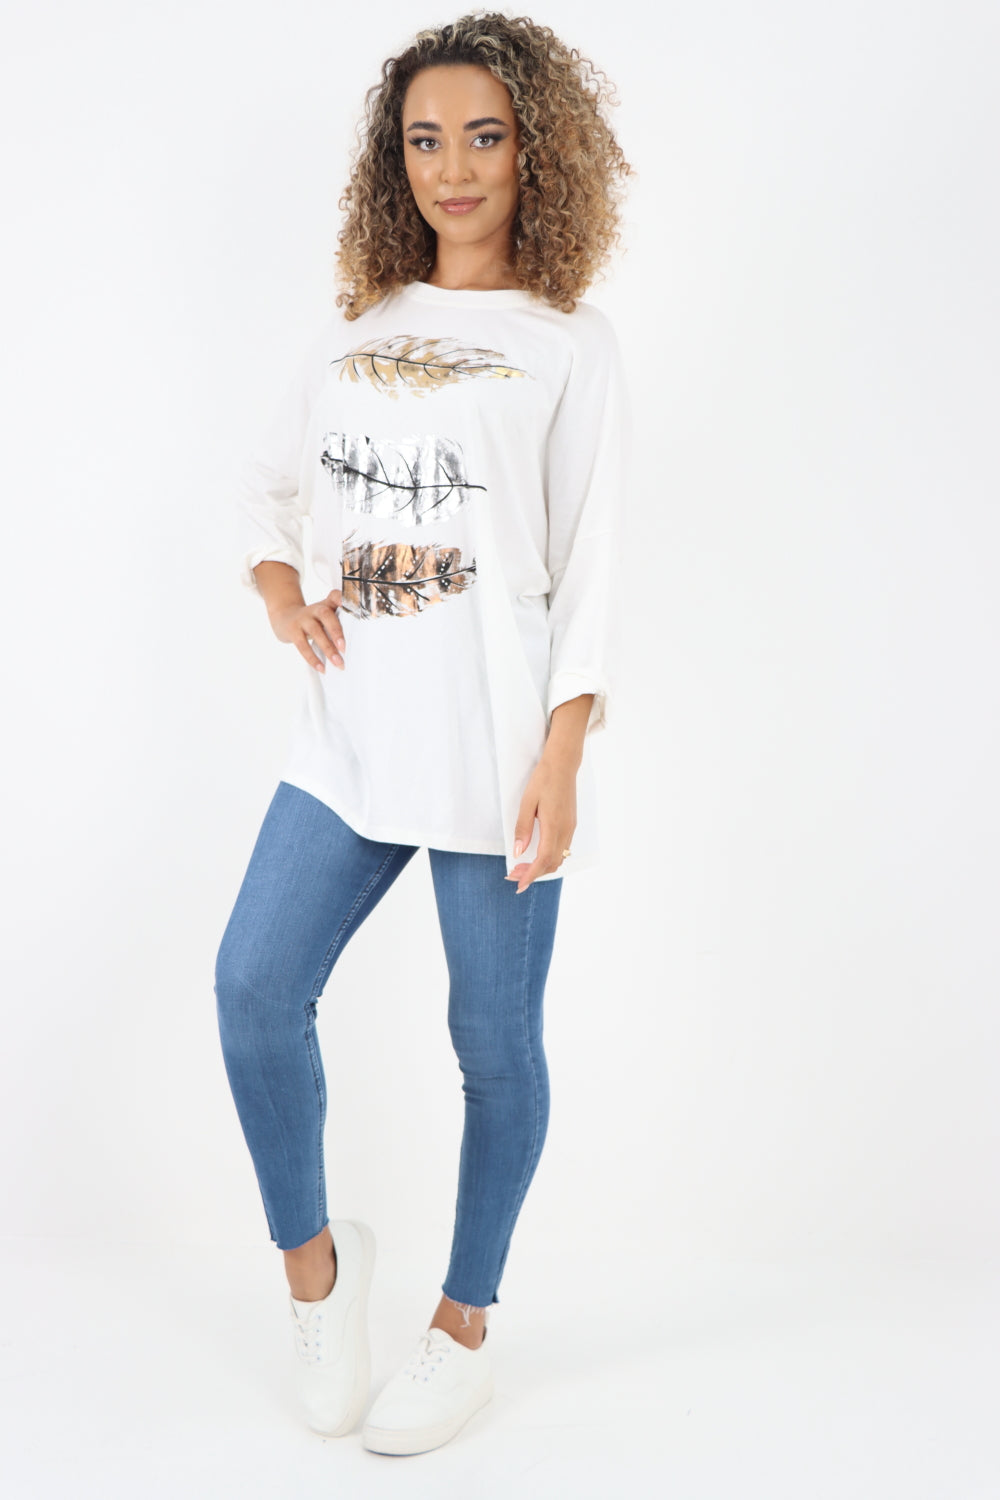 Italian Foil Feather Print Round Neck Jersey Tunic Top